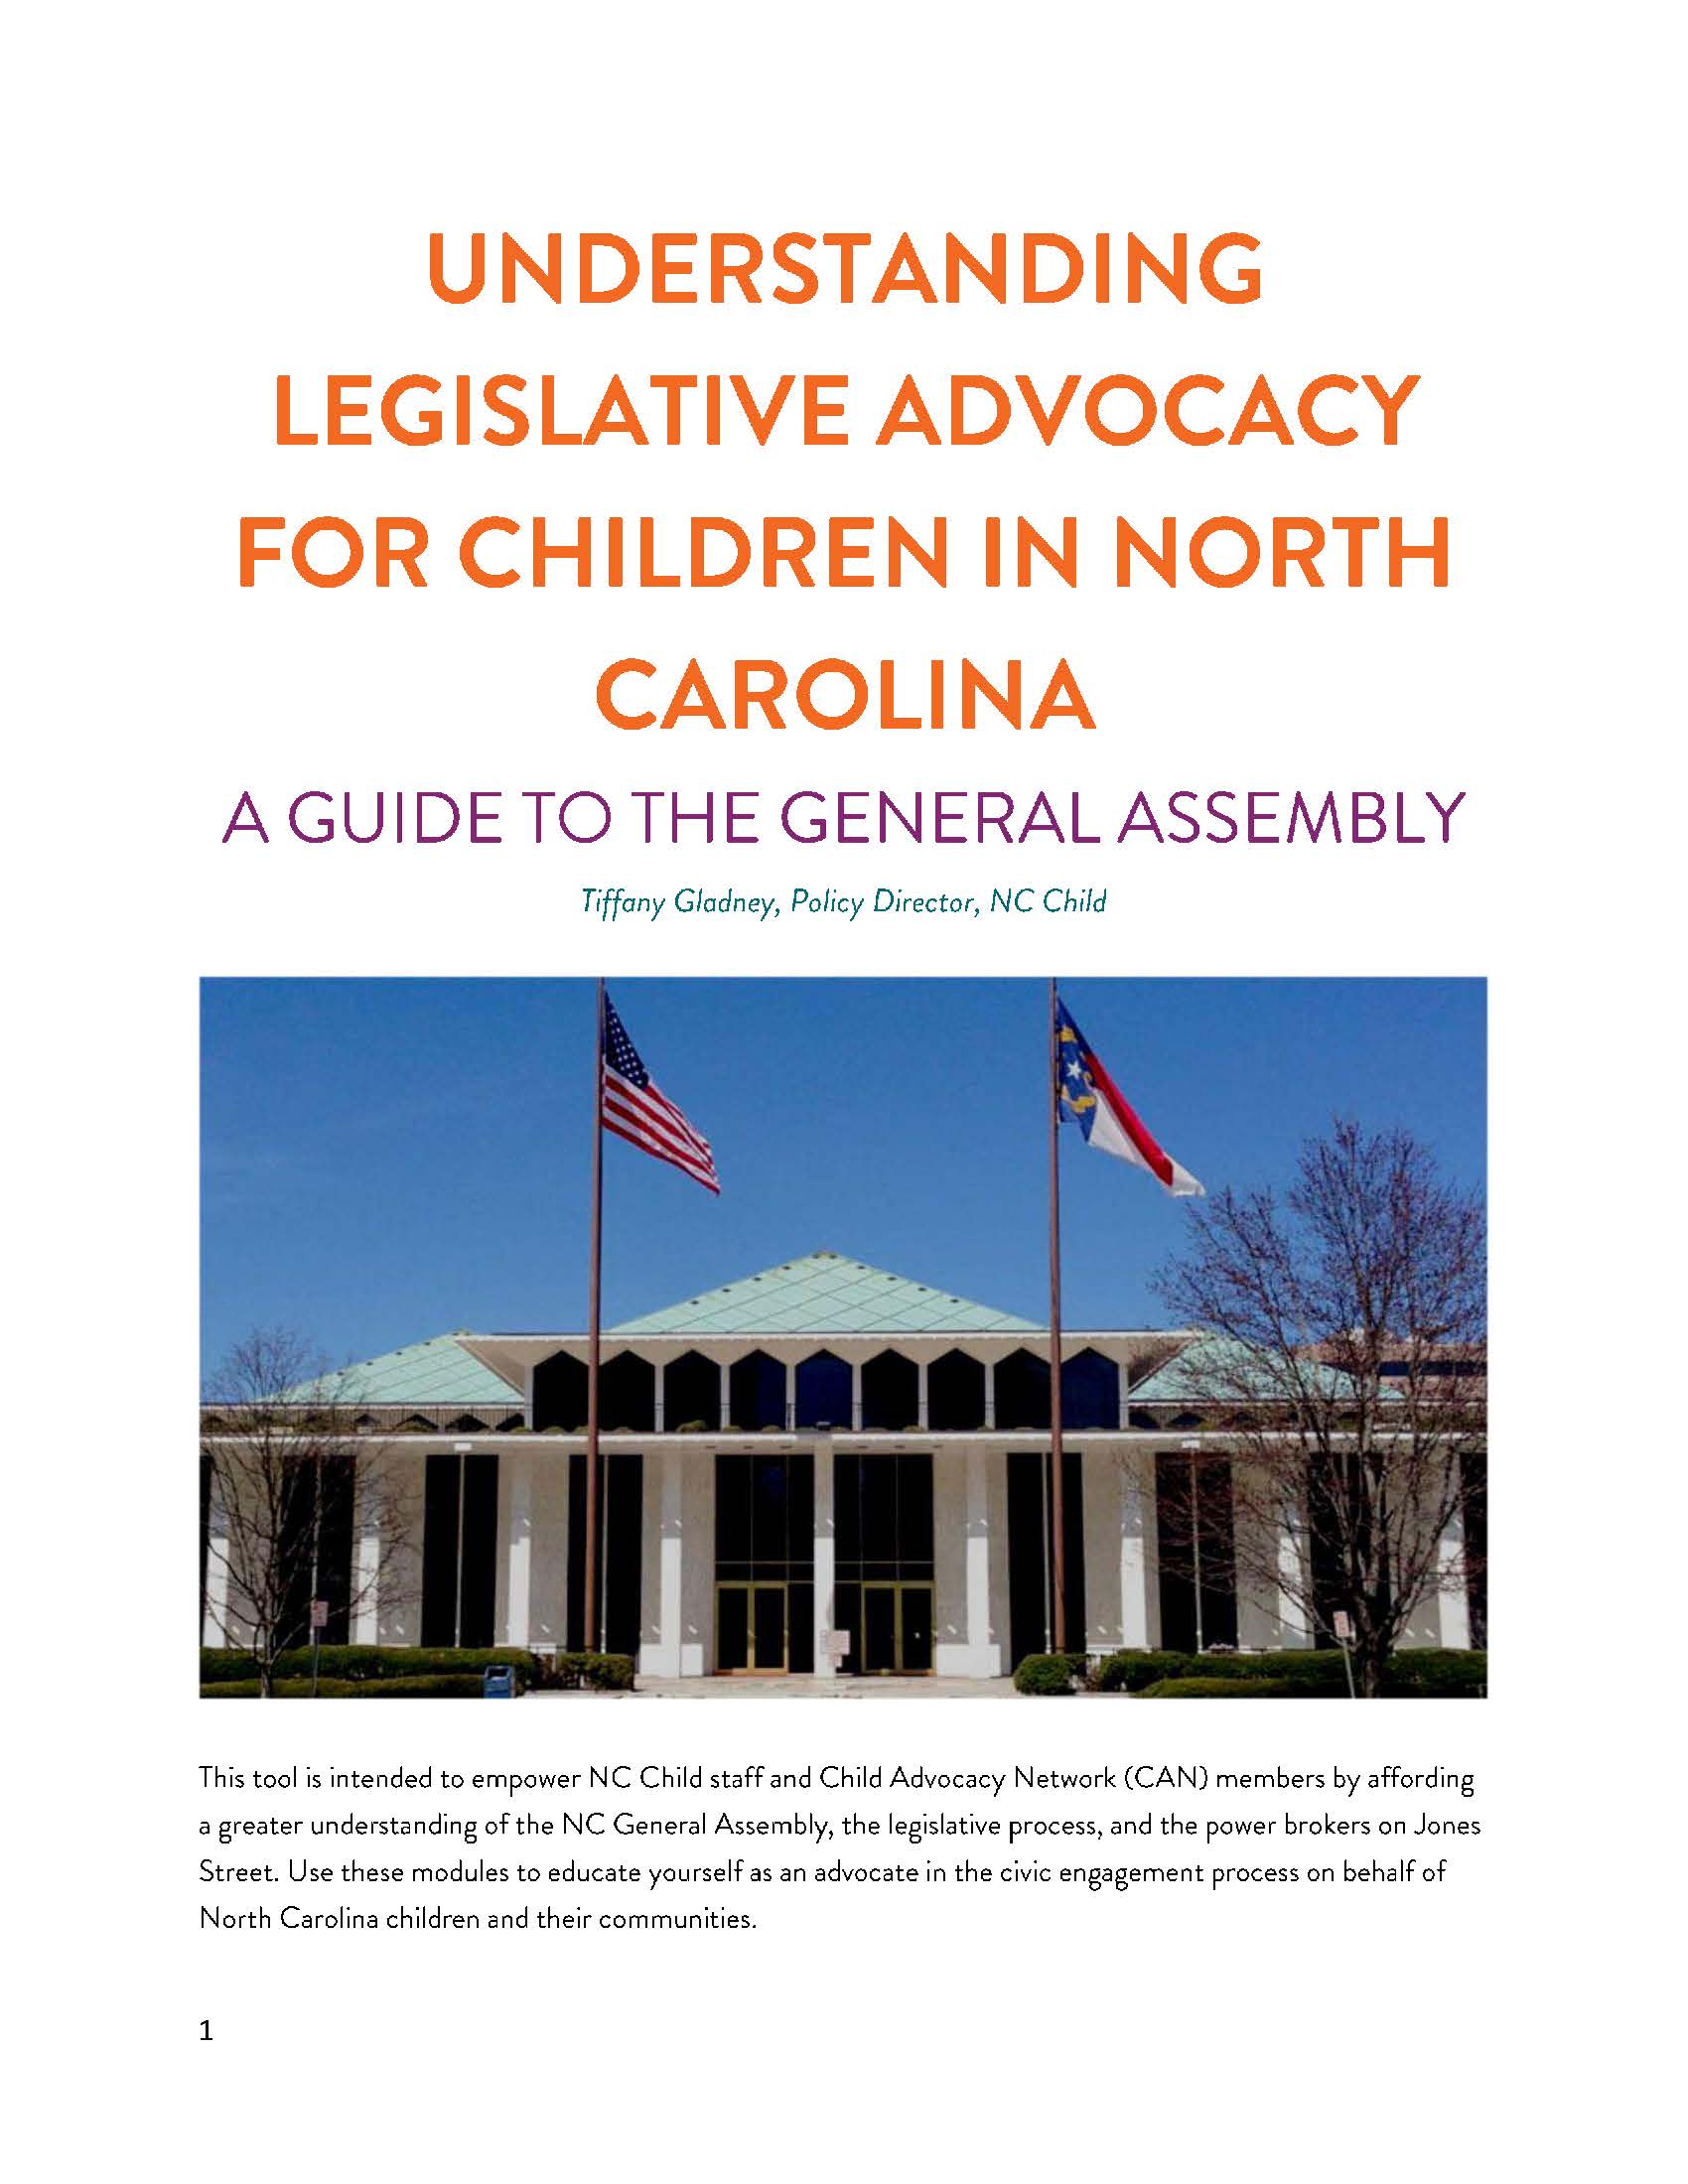 image of guide featuring a photo of the NC general assembly office building